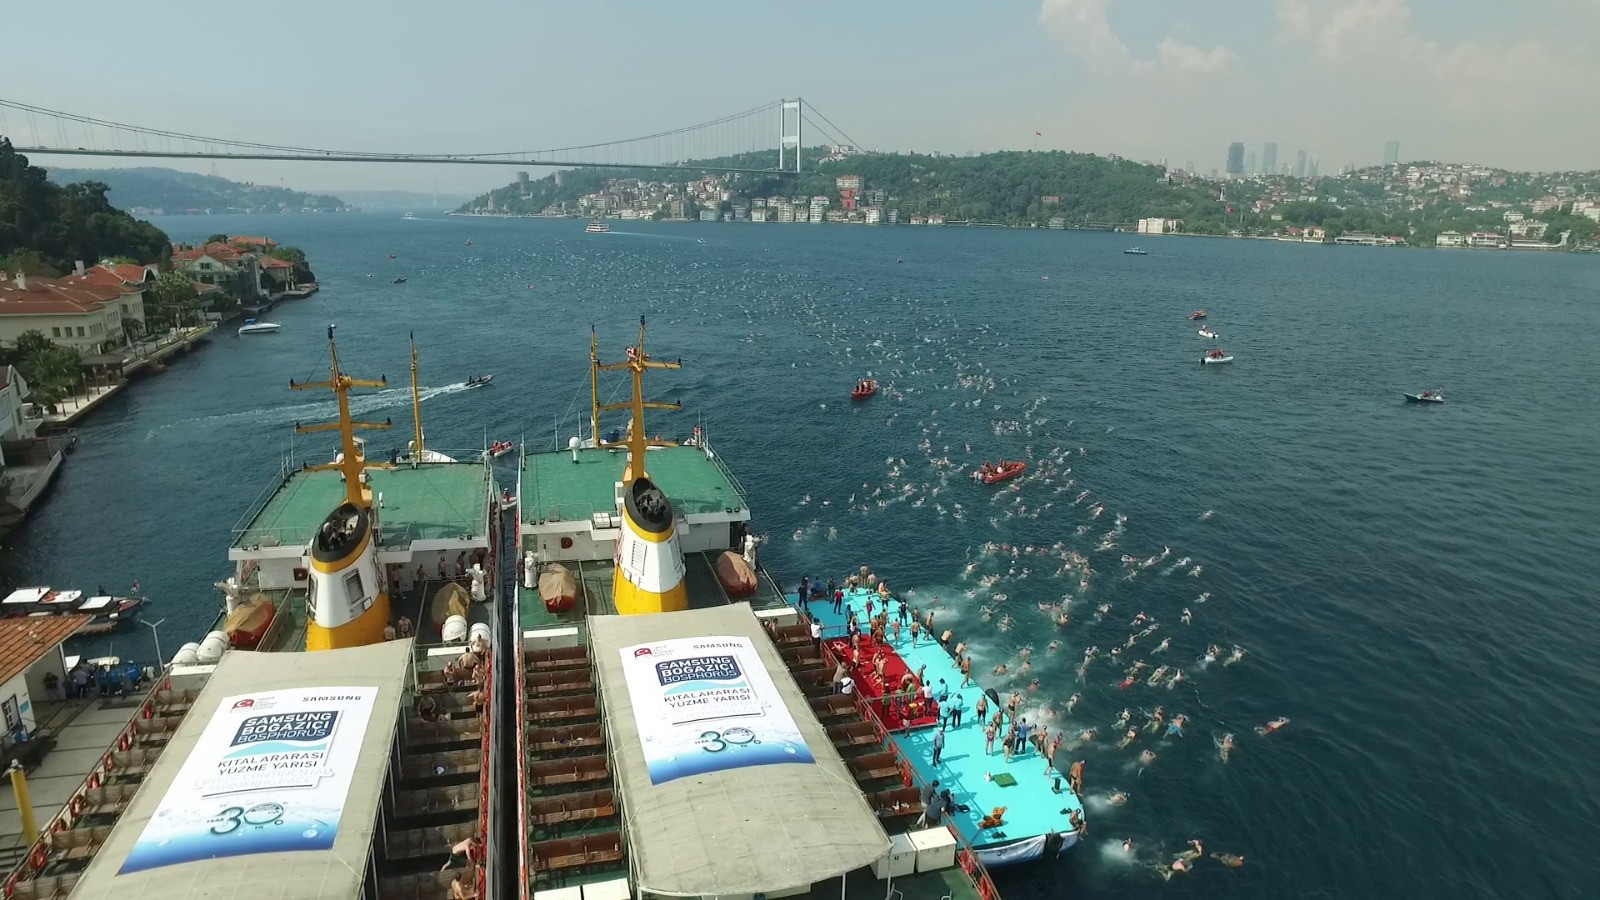 More than 2,000 take part in Bosphorus Cross-Continental Swimming Race organised by Turkish Olympic Committee